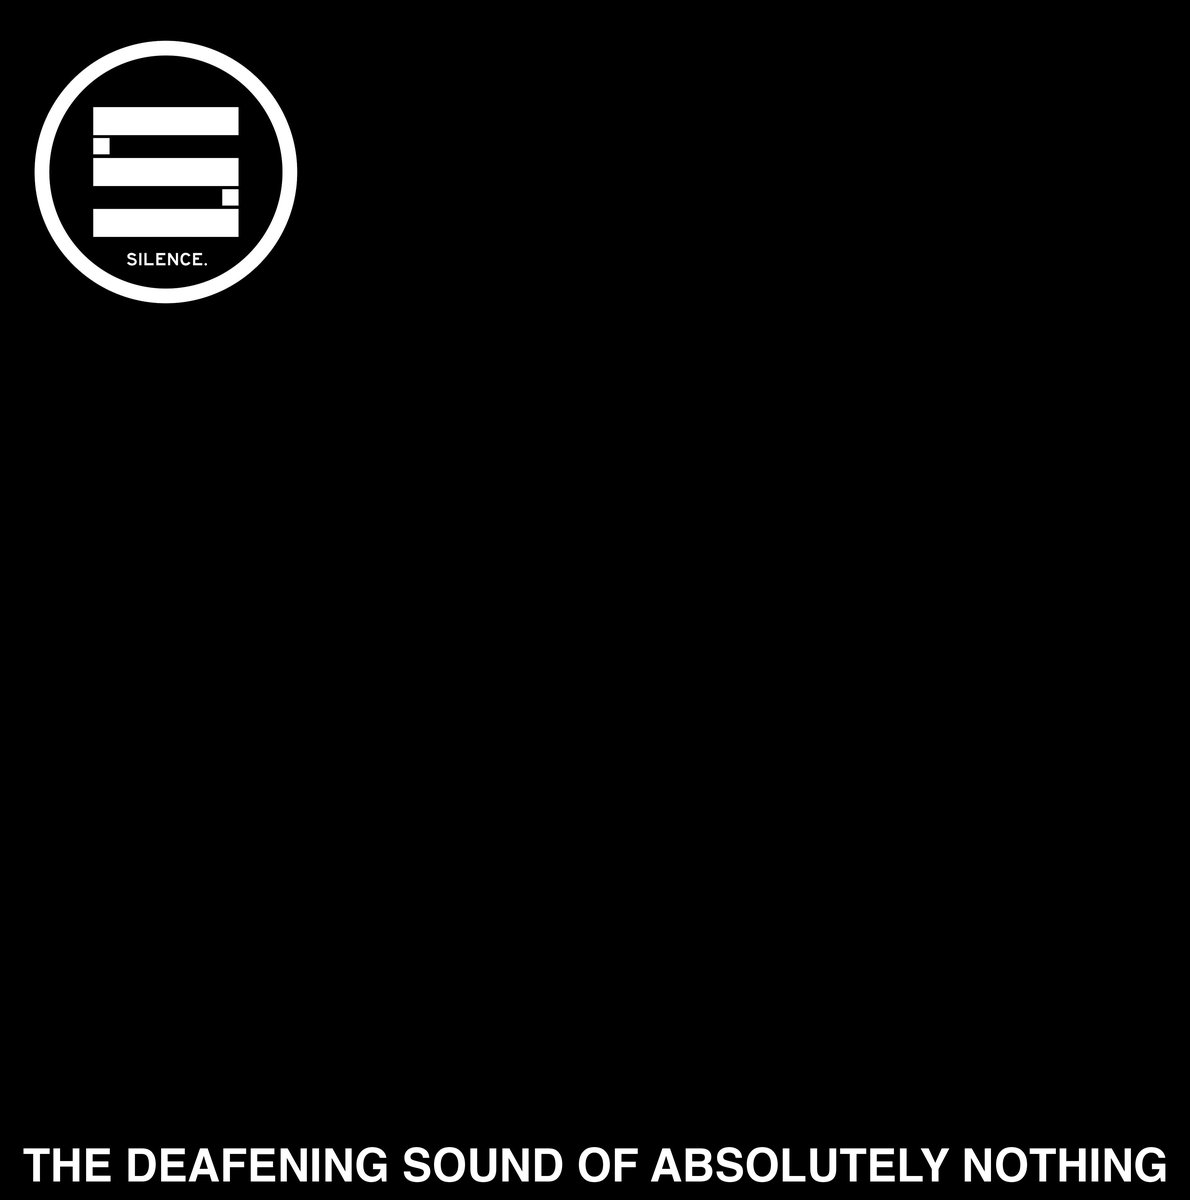 SILENCE - The deafening sound of absolutely nothing